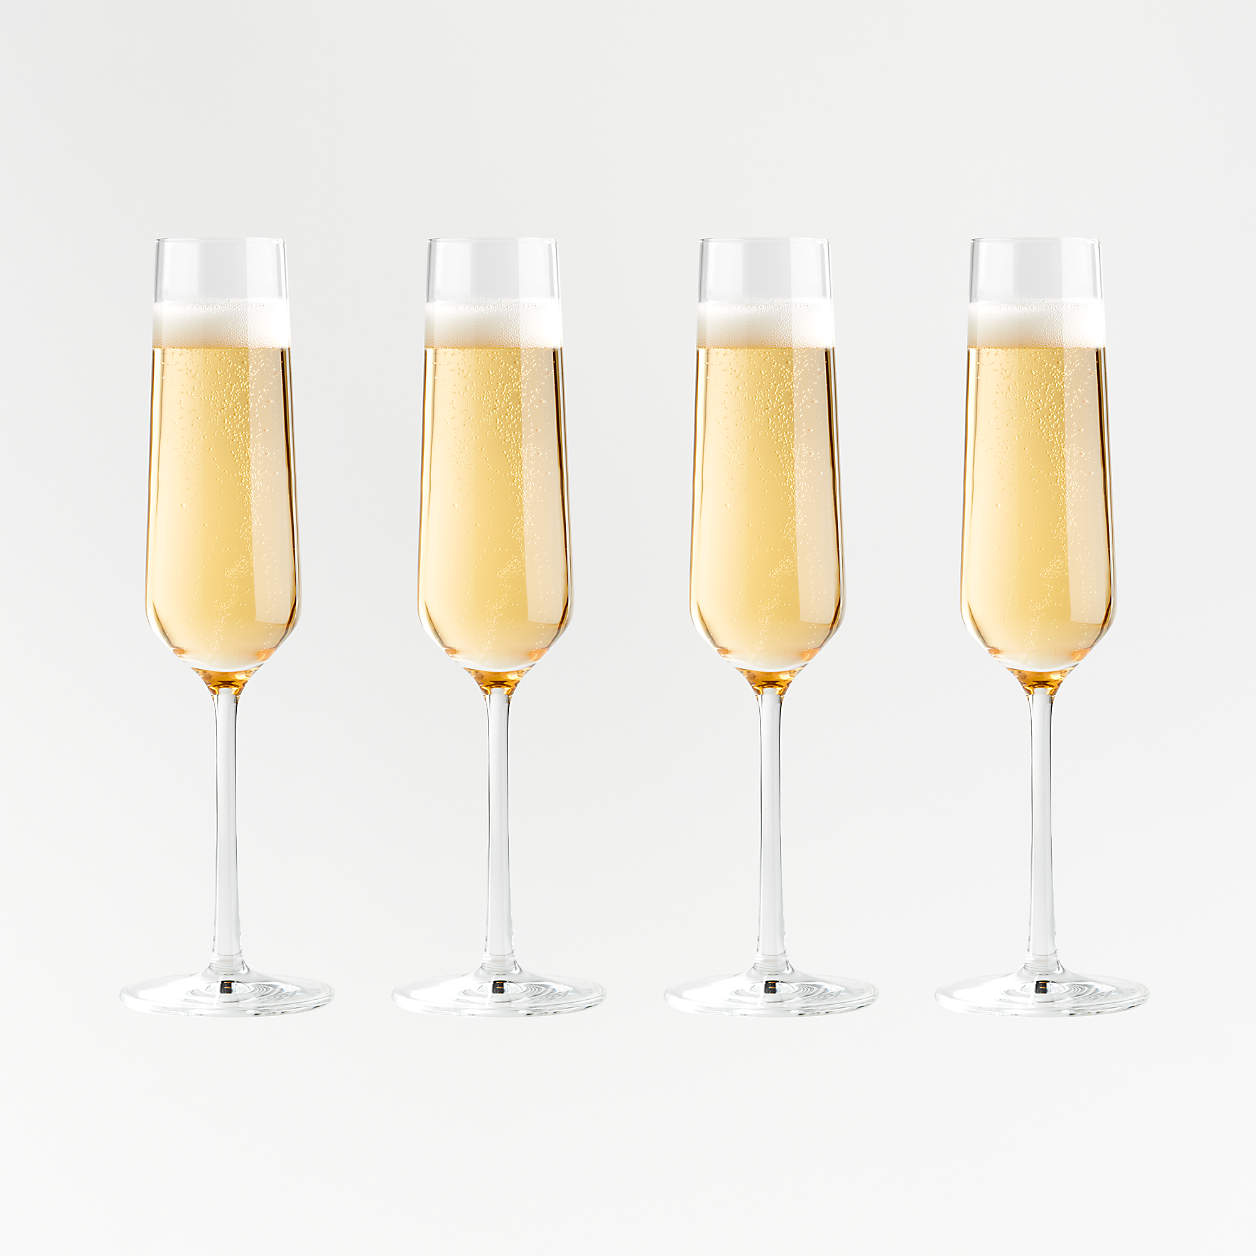 Schott Zwiesel Tour Champagne Glasses, Set of 4